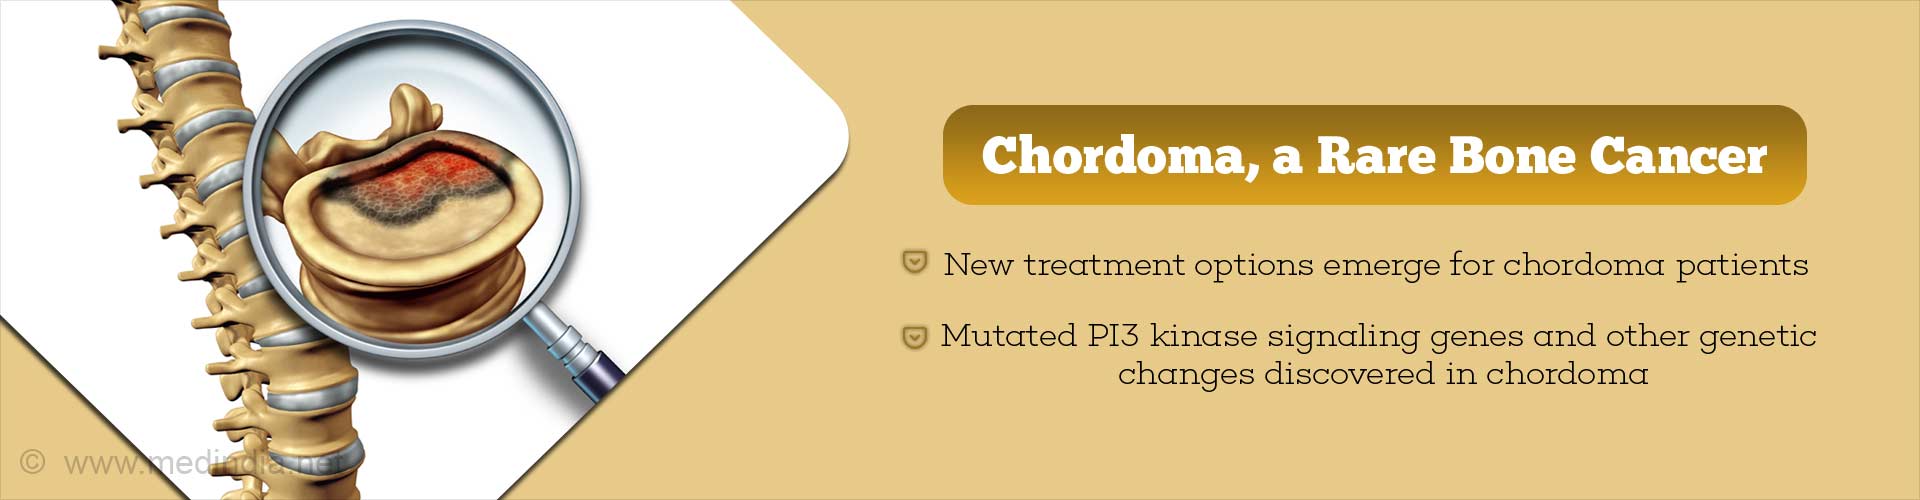 chordoma, a rare bone cancer
- new treatment options emerge for chordoma patients
- mutated p13 kinase signaling genes and other genetic changes discovered in chordoma